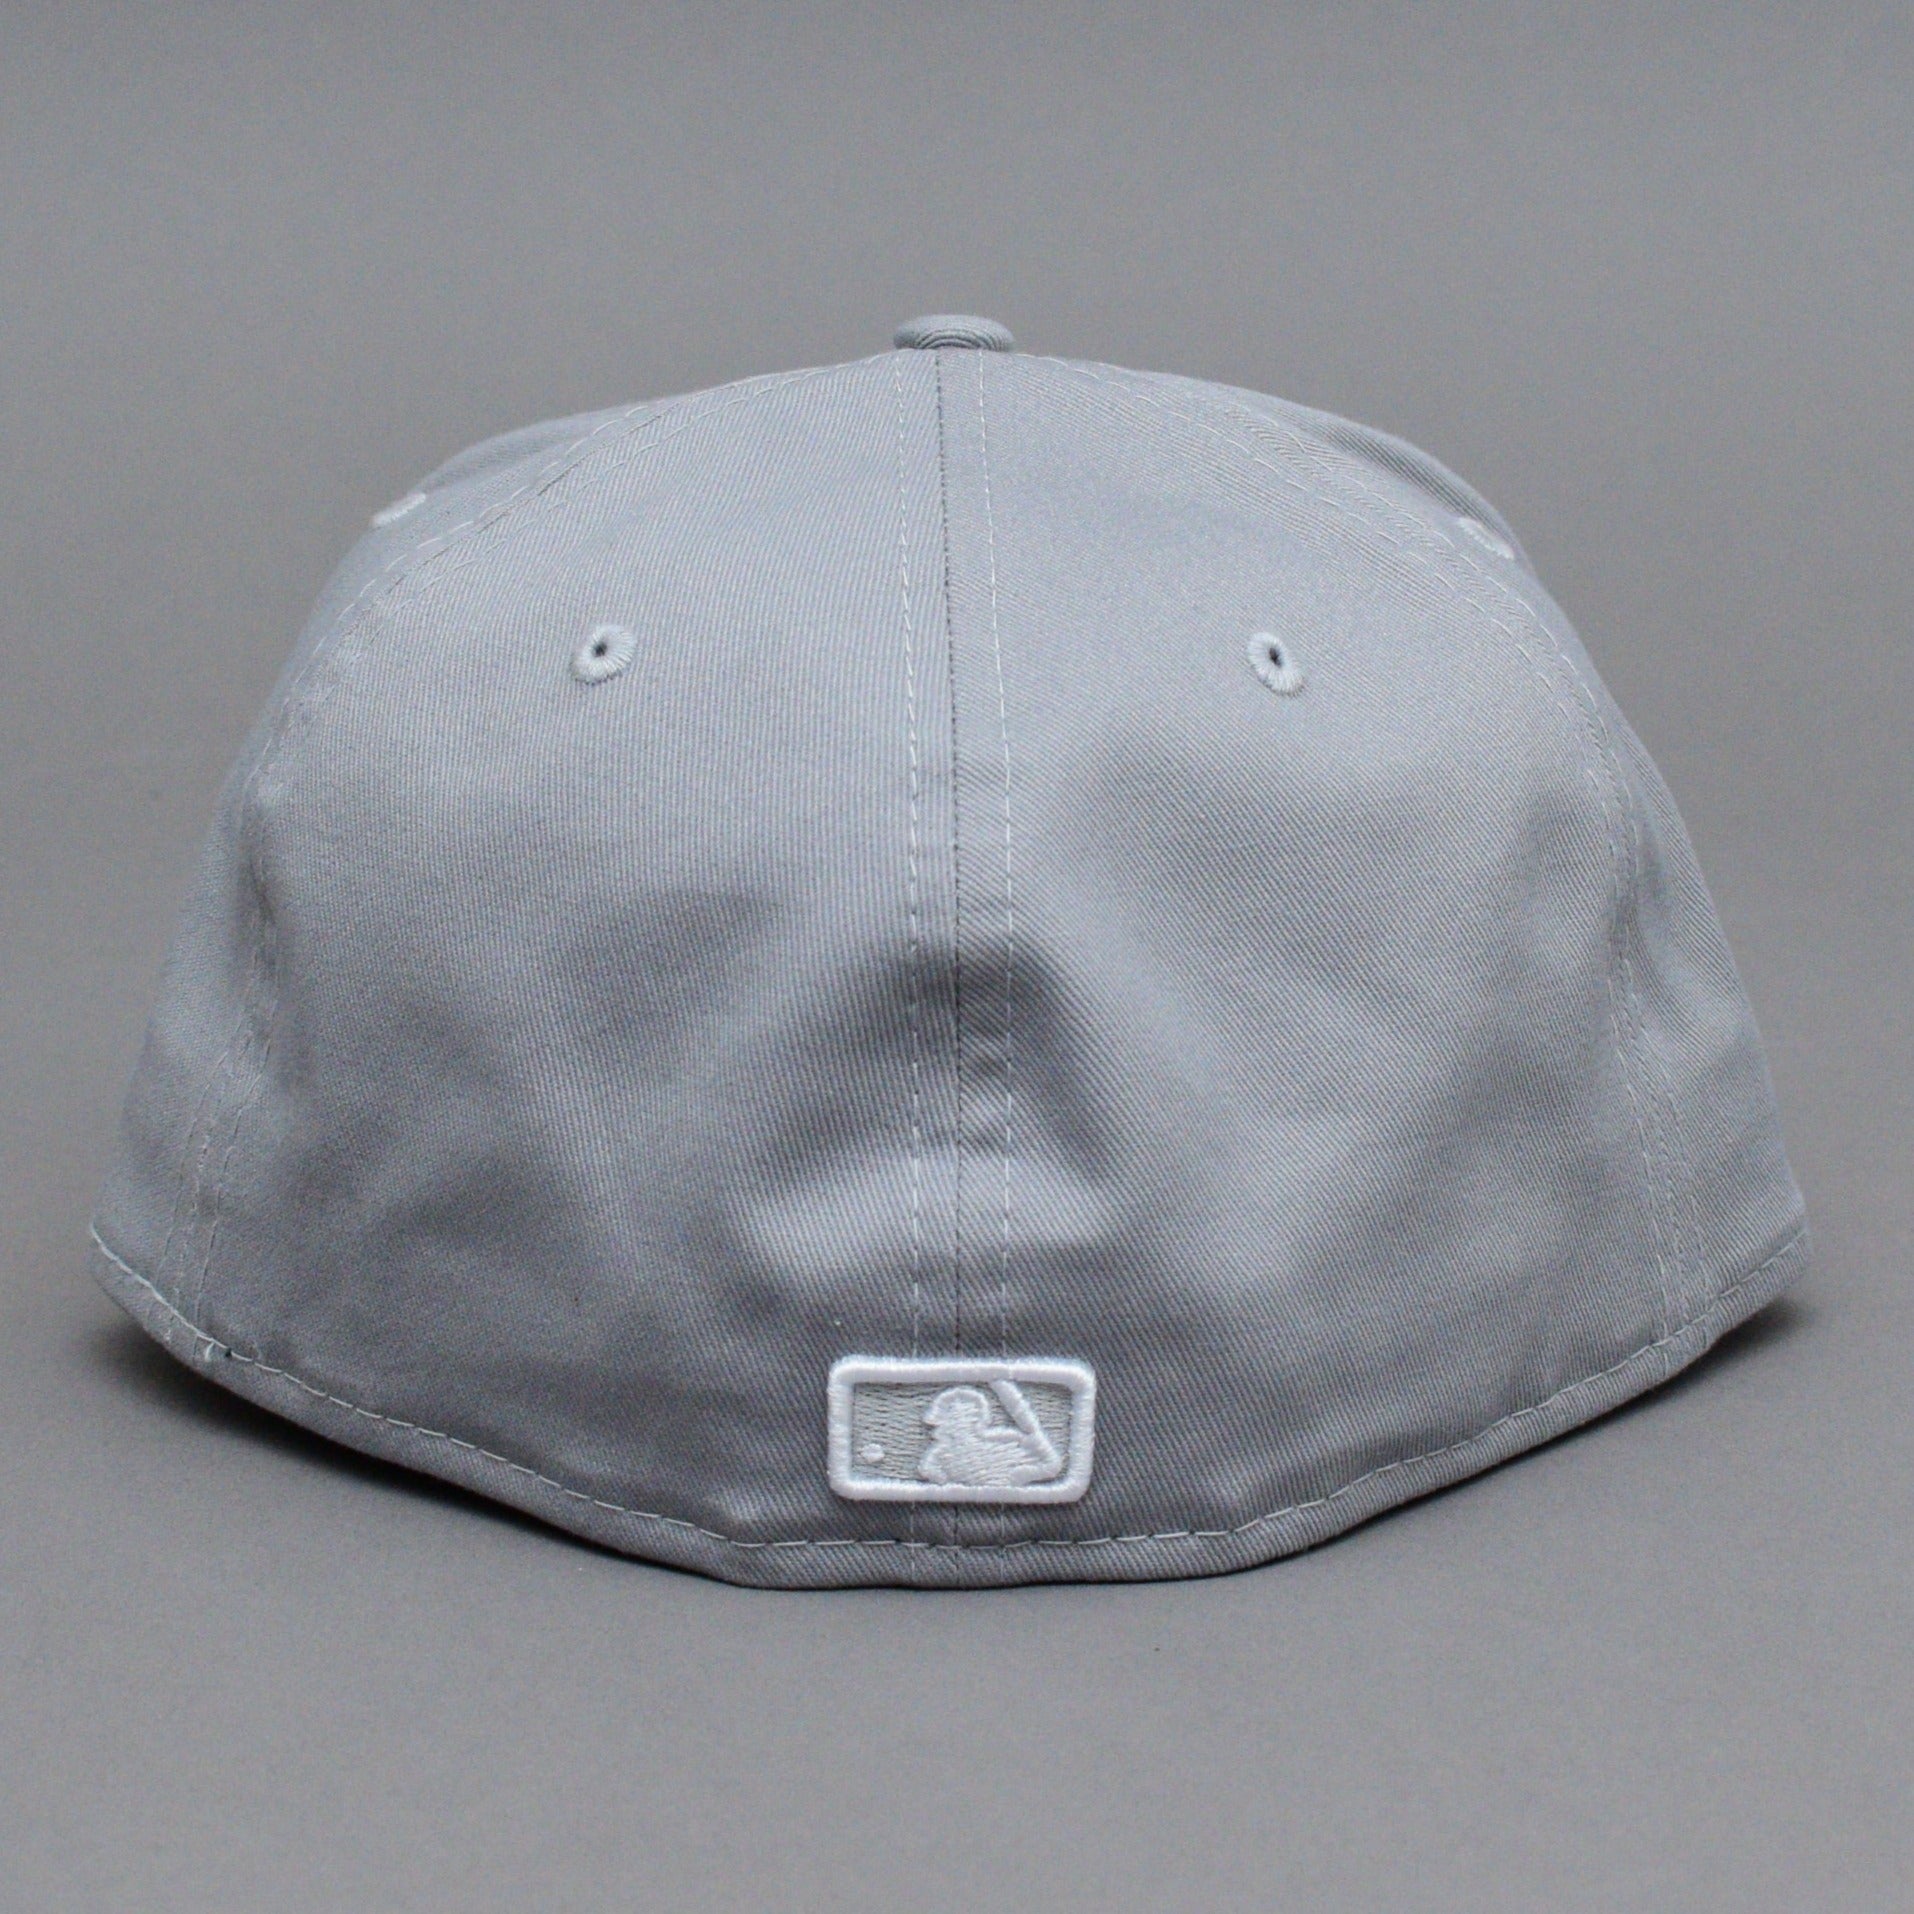 New Era - NY Yankees 59Fifty Monocamo Infill - Fitted - Grey